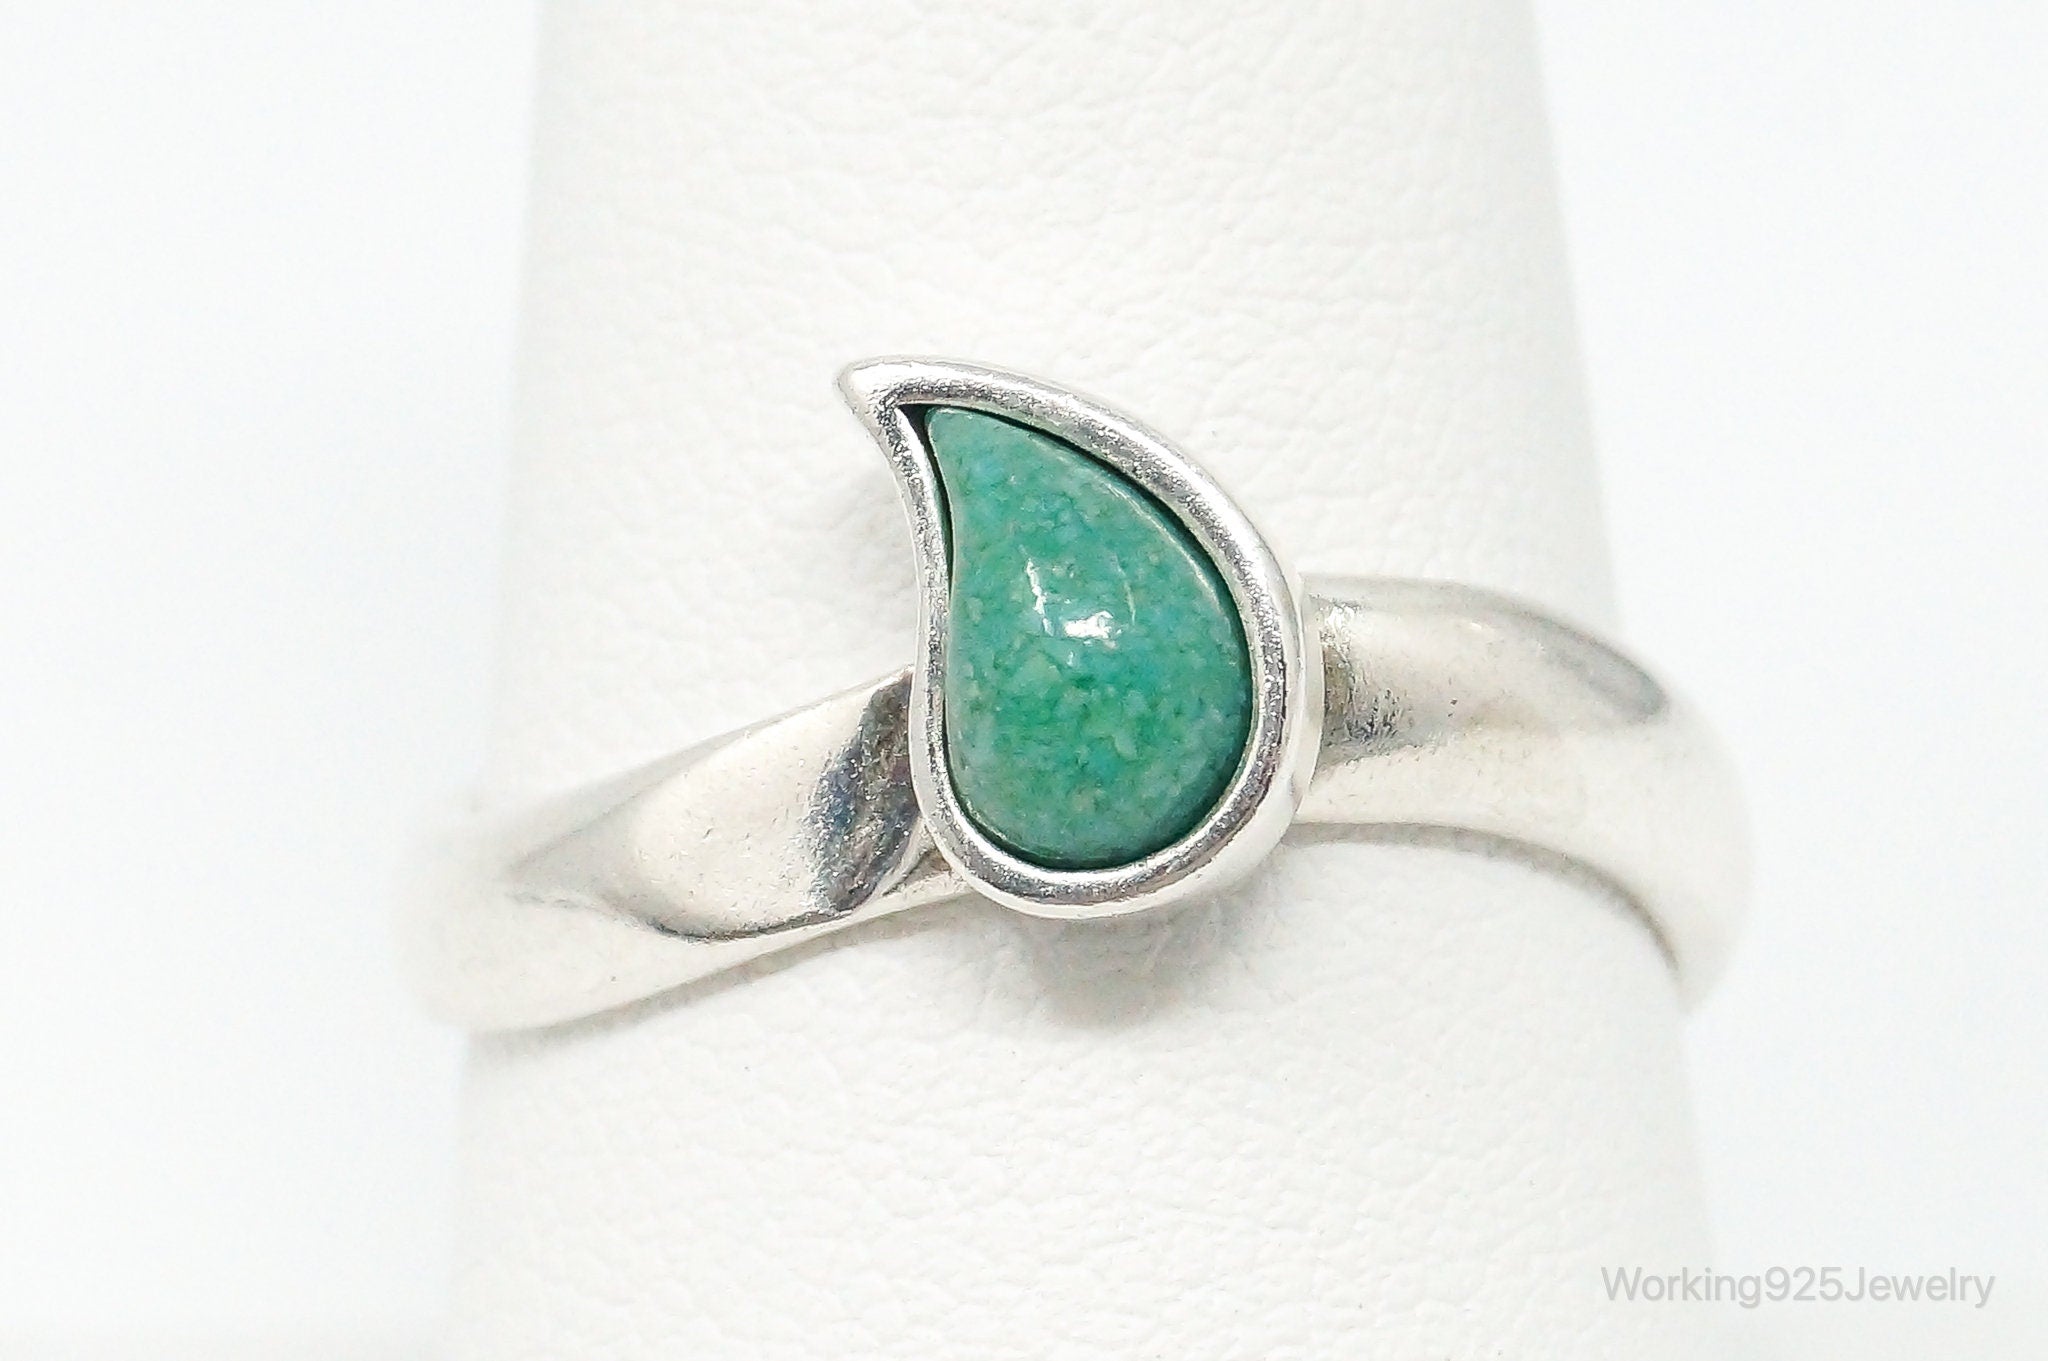 Southwestern Carolyn Pollack Relios Turquoise Sterling Silver Ring - Size 9